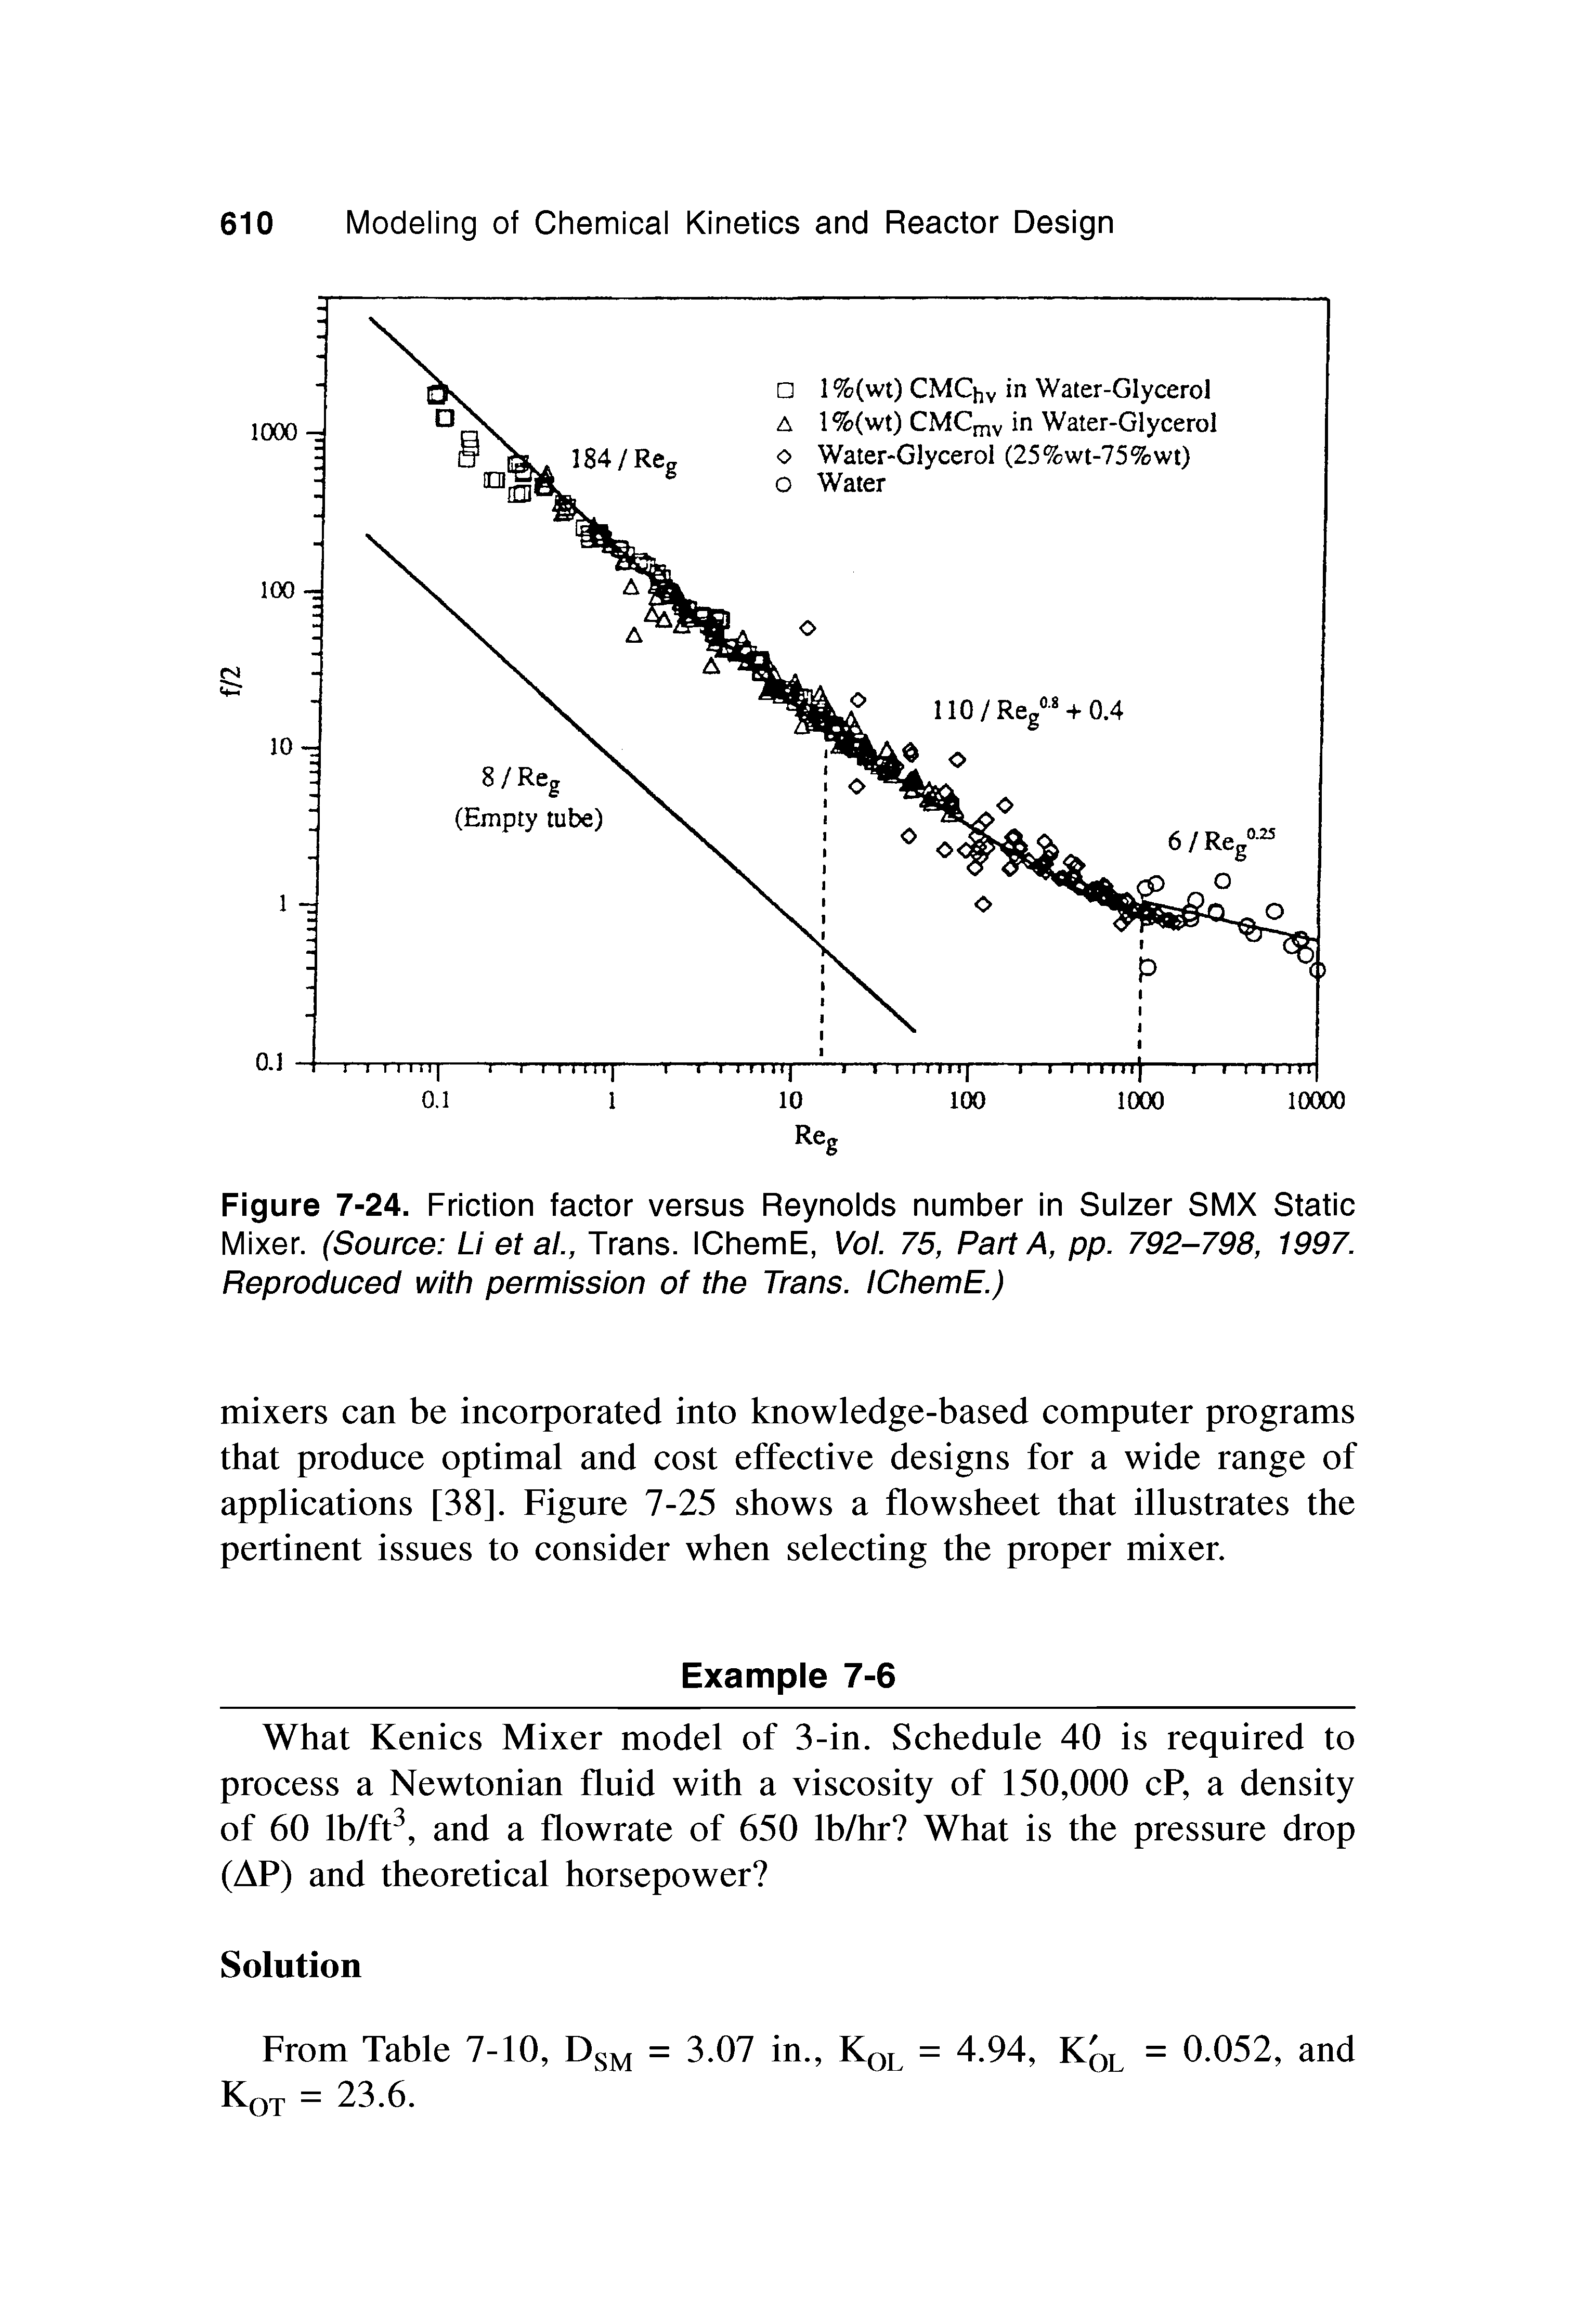 Figure 7-24. Friction factor versus Reynolds number in Sulzer SMX Static Mixer. (Source Li et al., Trans. IChemE, Vol. 75, Part A, pp. 792-798, 1997. Reproduced with permission of the Trans. IChemE.)...